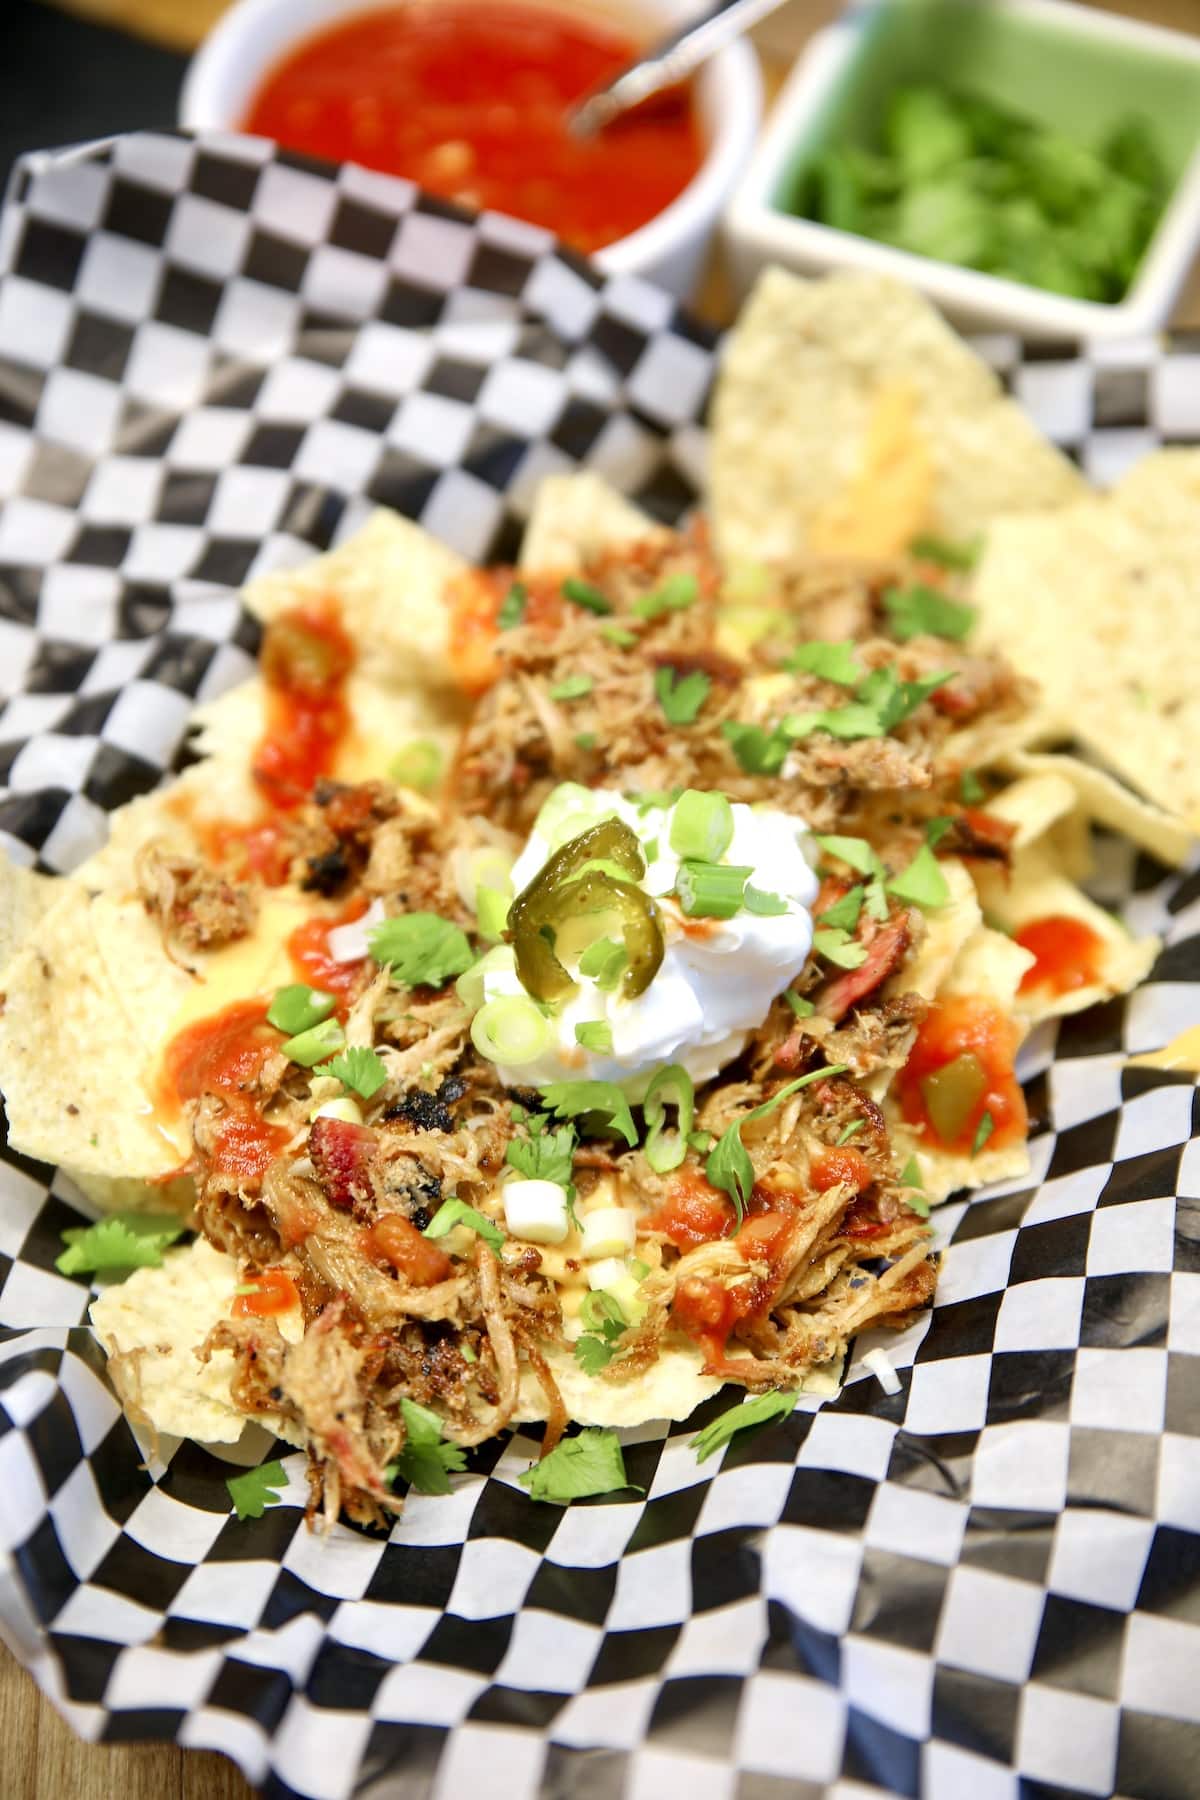 Pulled pork nachos on a checked paper lined basket.